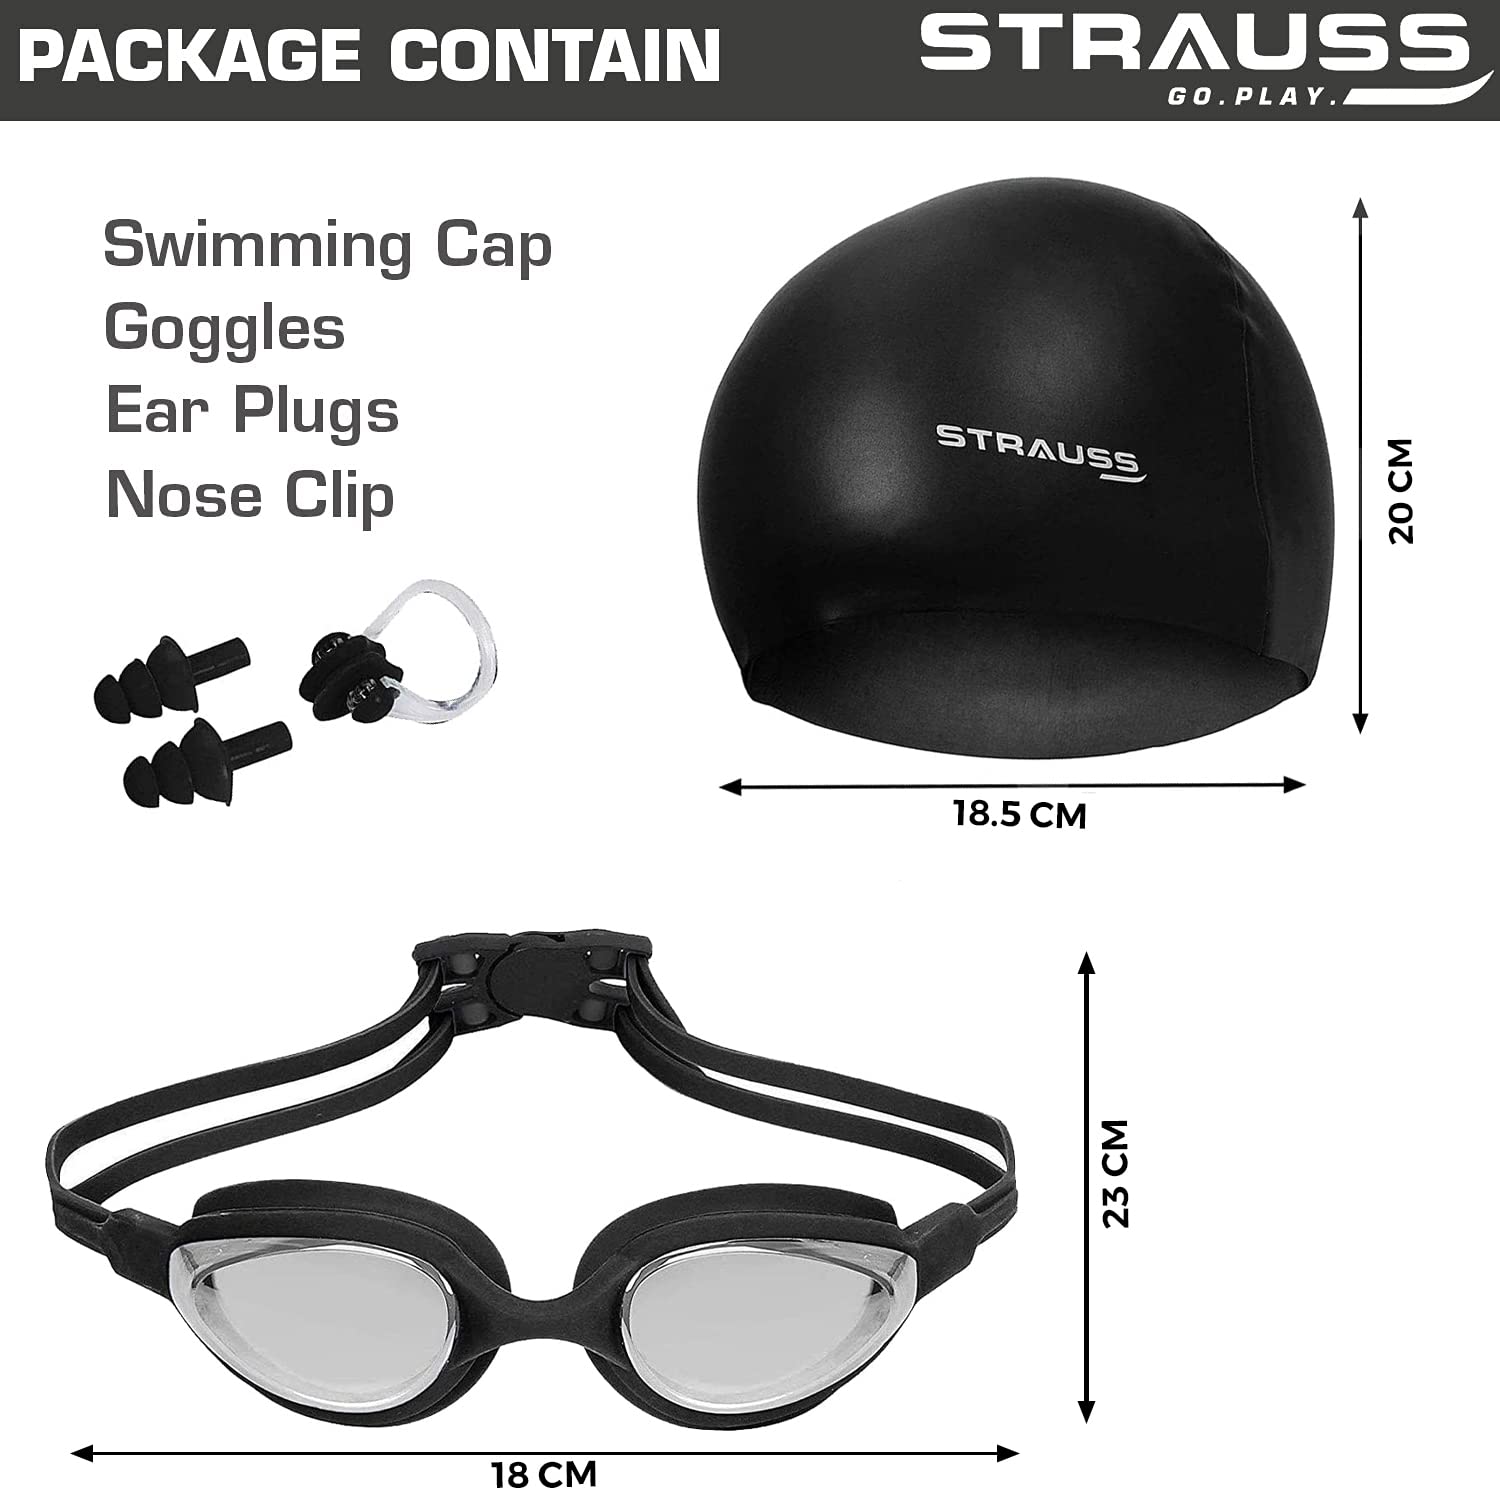 STRAUSS Swimming Goggles Set with UV and Anti Fog Protection | Swimming Kit of Goggles,Cap,Earplug & Nose Plug Set - Ideal for All Age Group | Fully Adjustable | (Black)